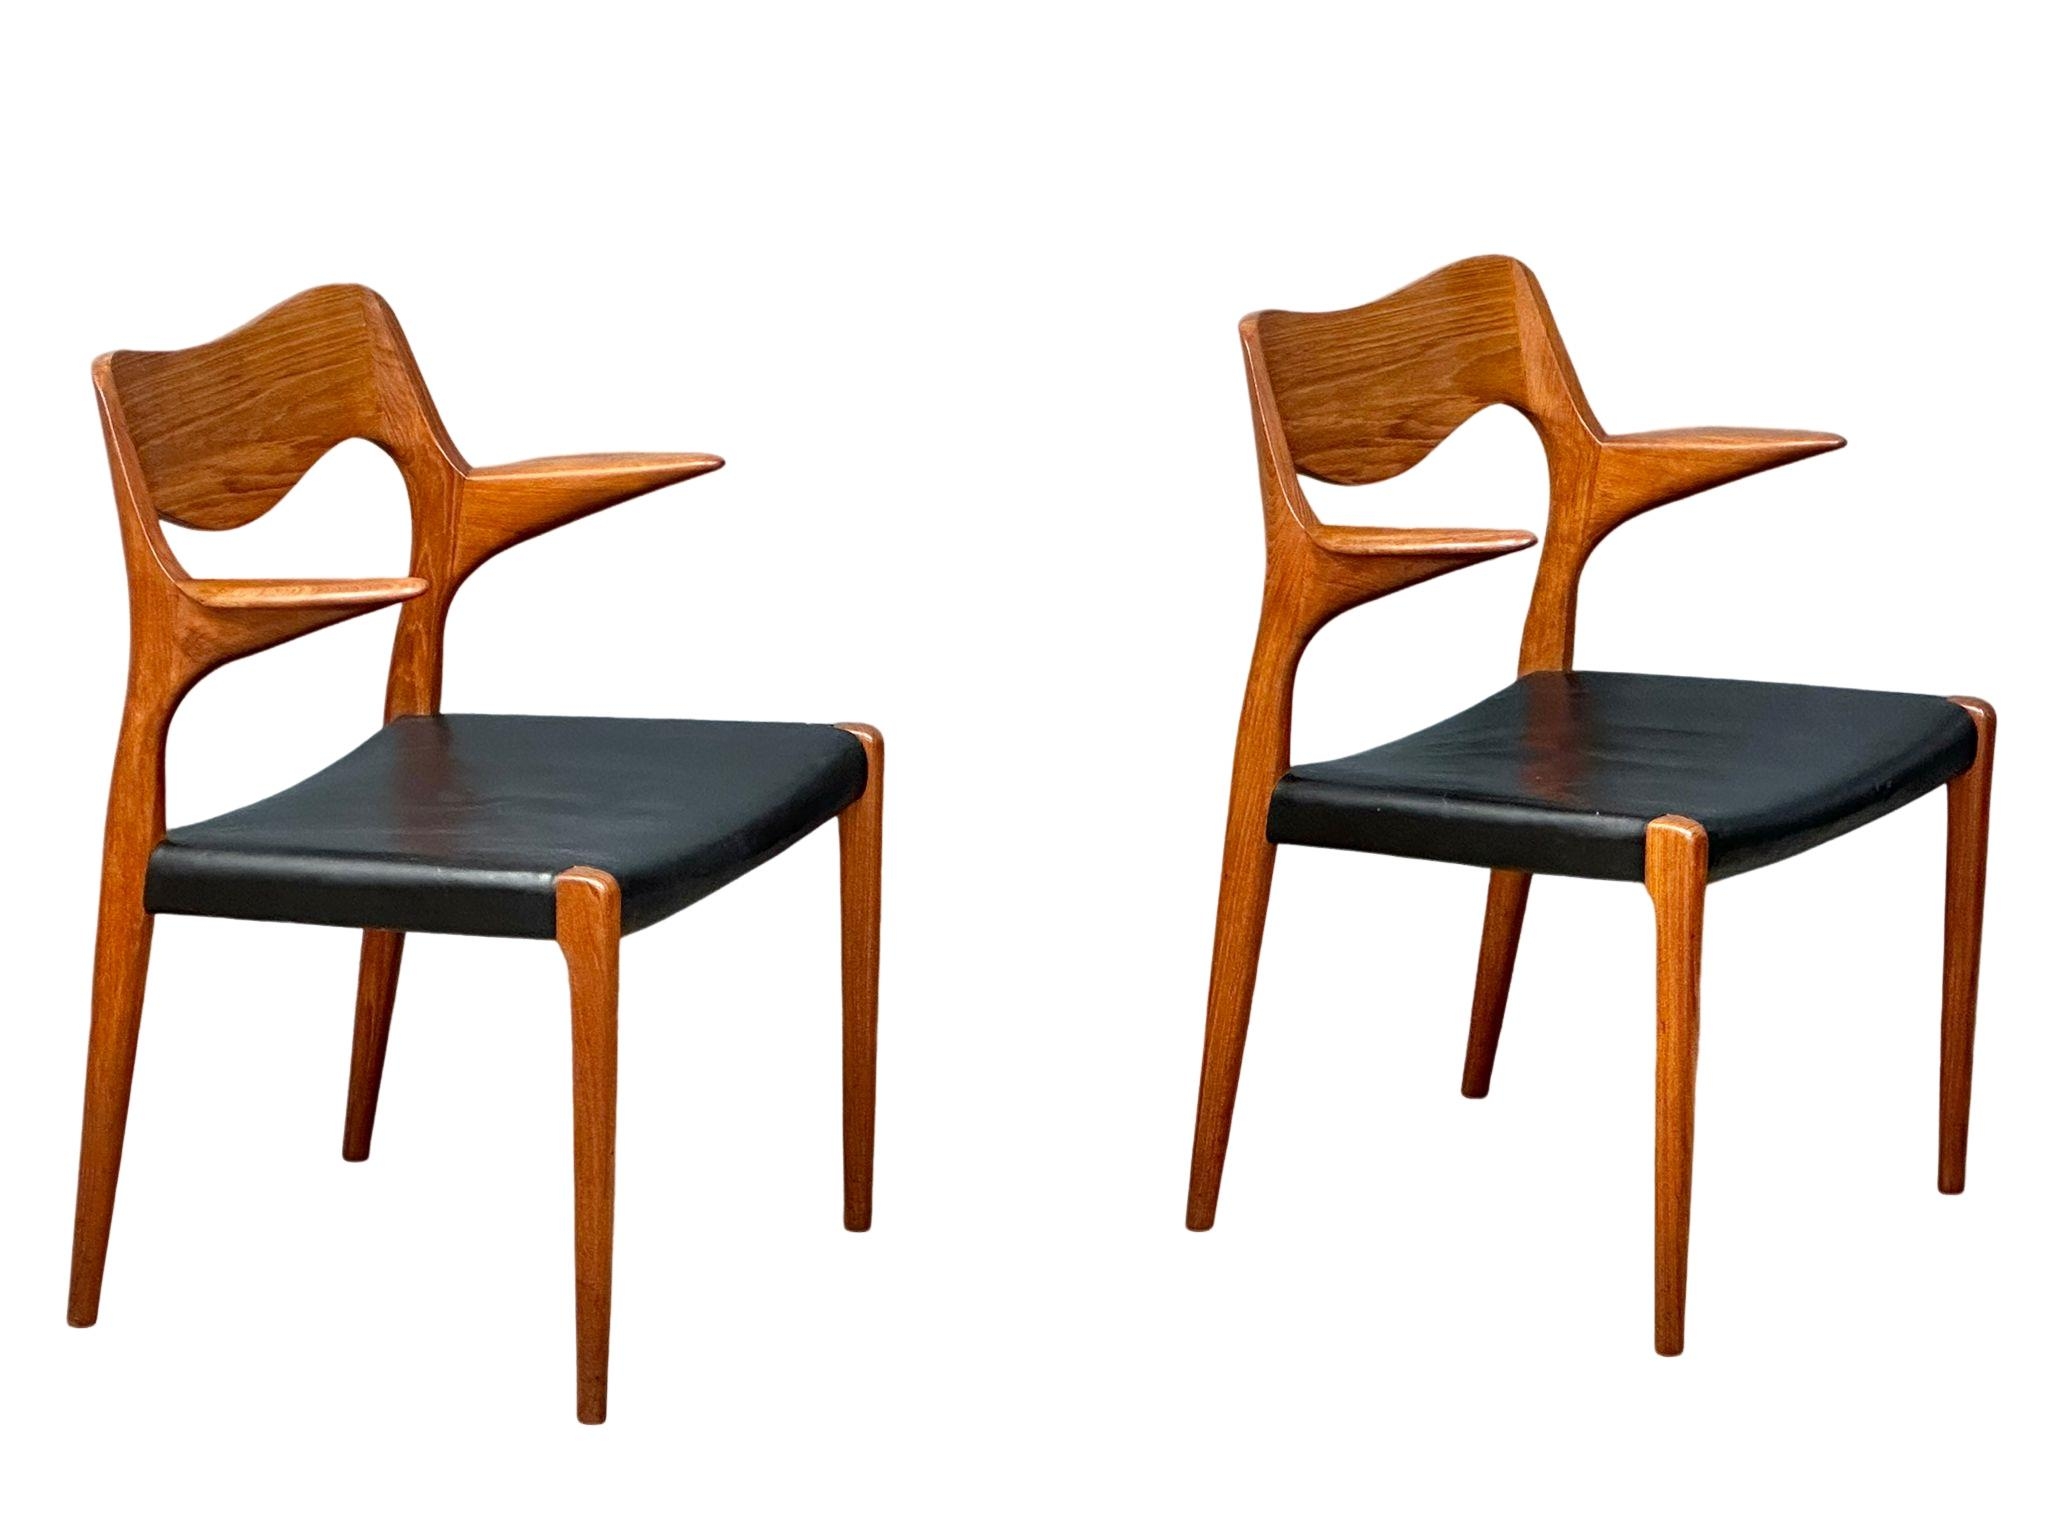 A pair of rare Danish Mid Century teak carver armchairs designed by Niels Otto Moller for J.L. - Image 11 of 12